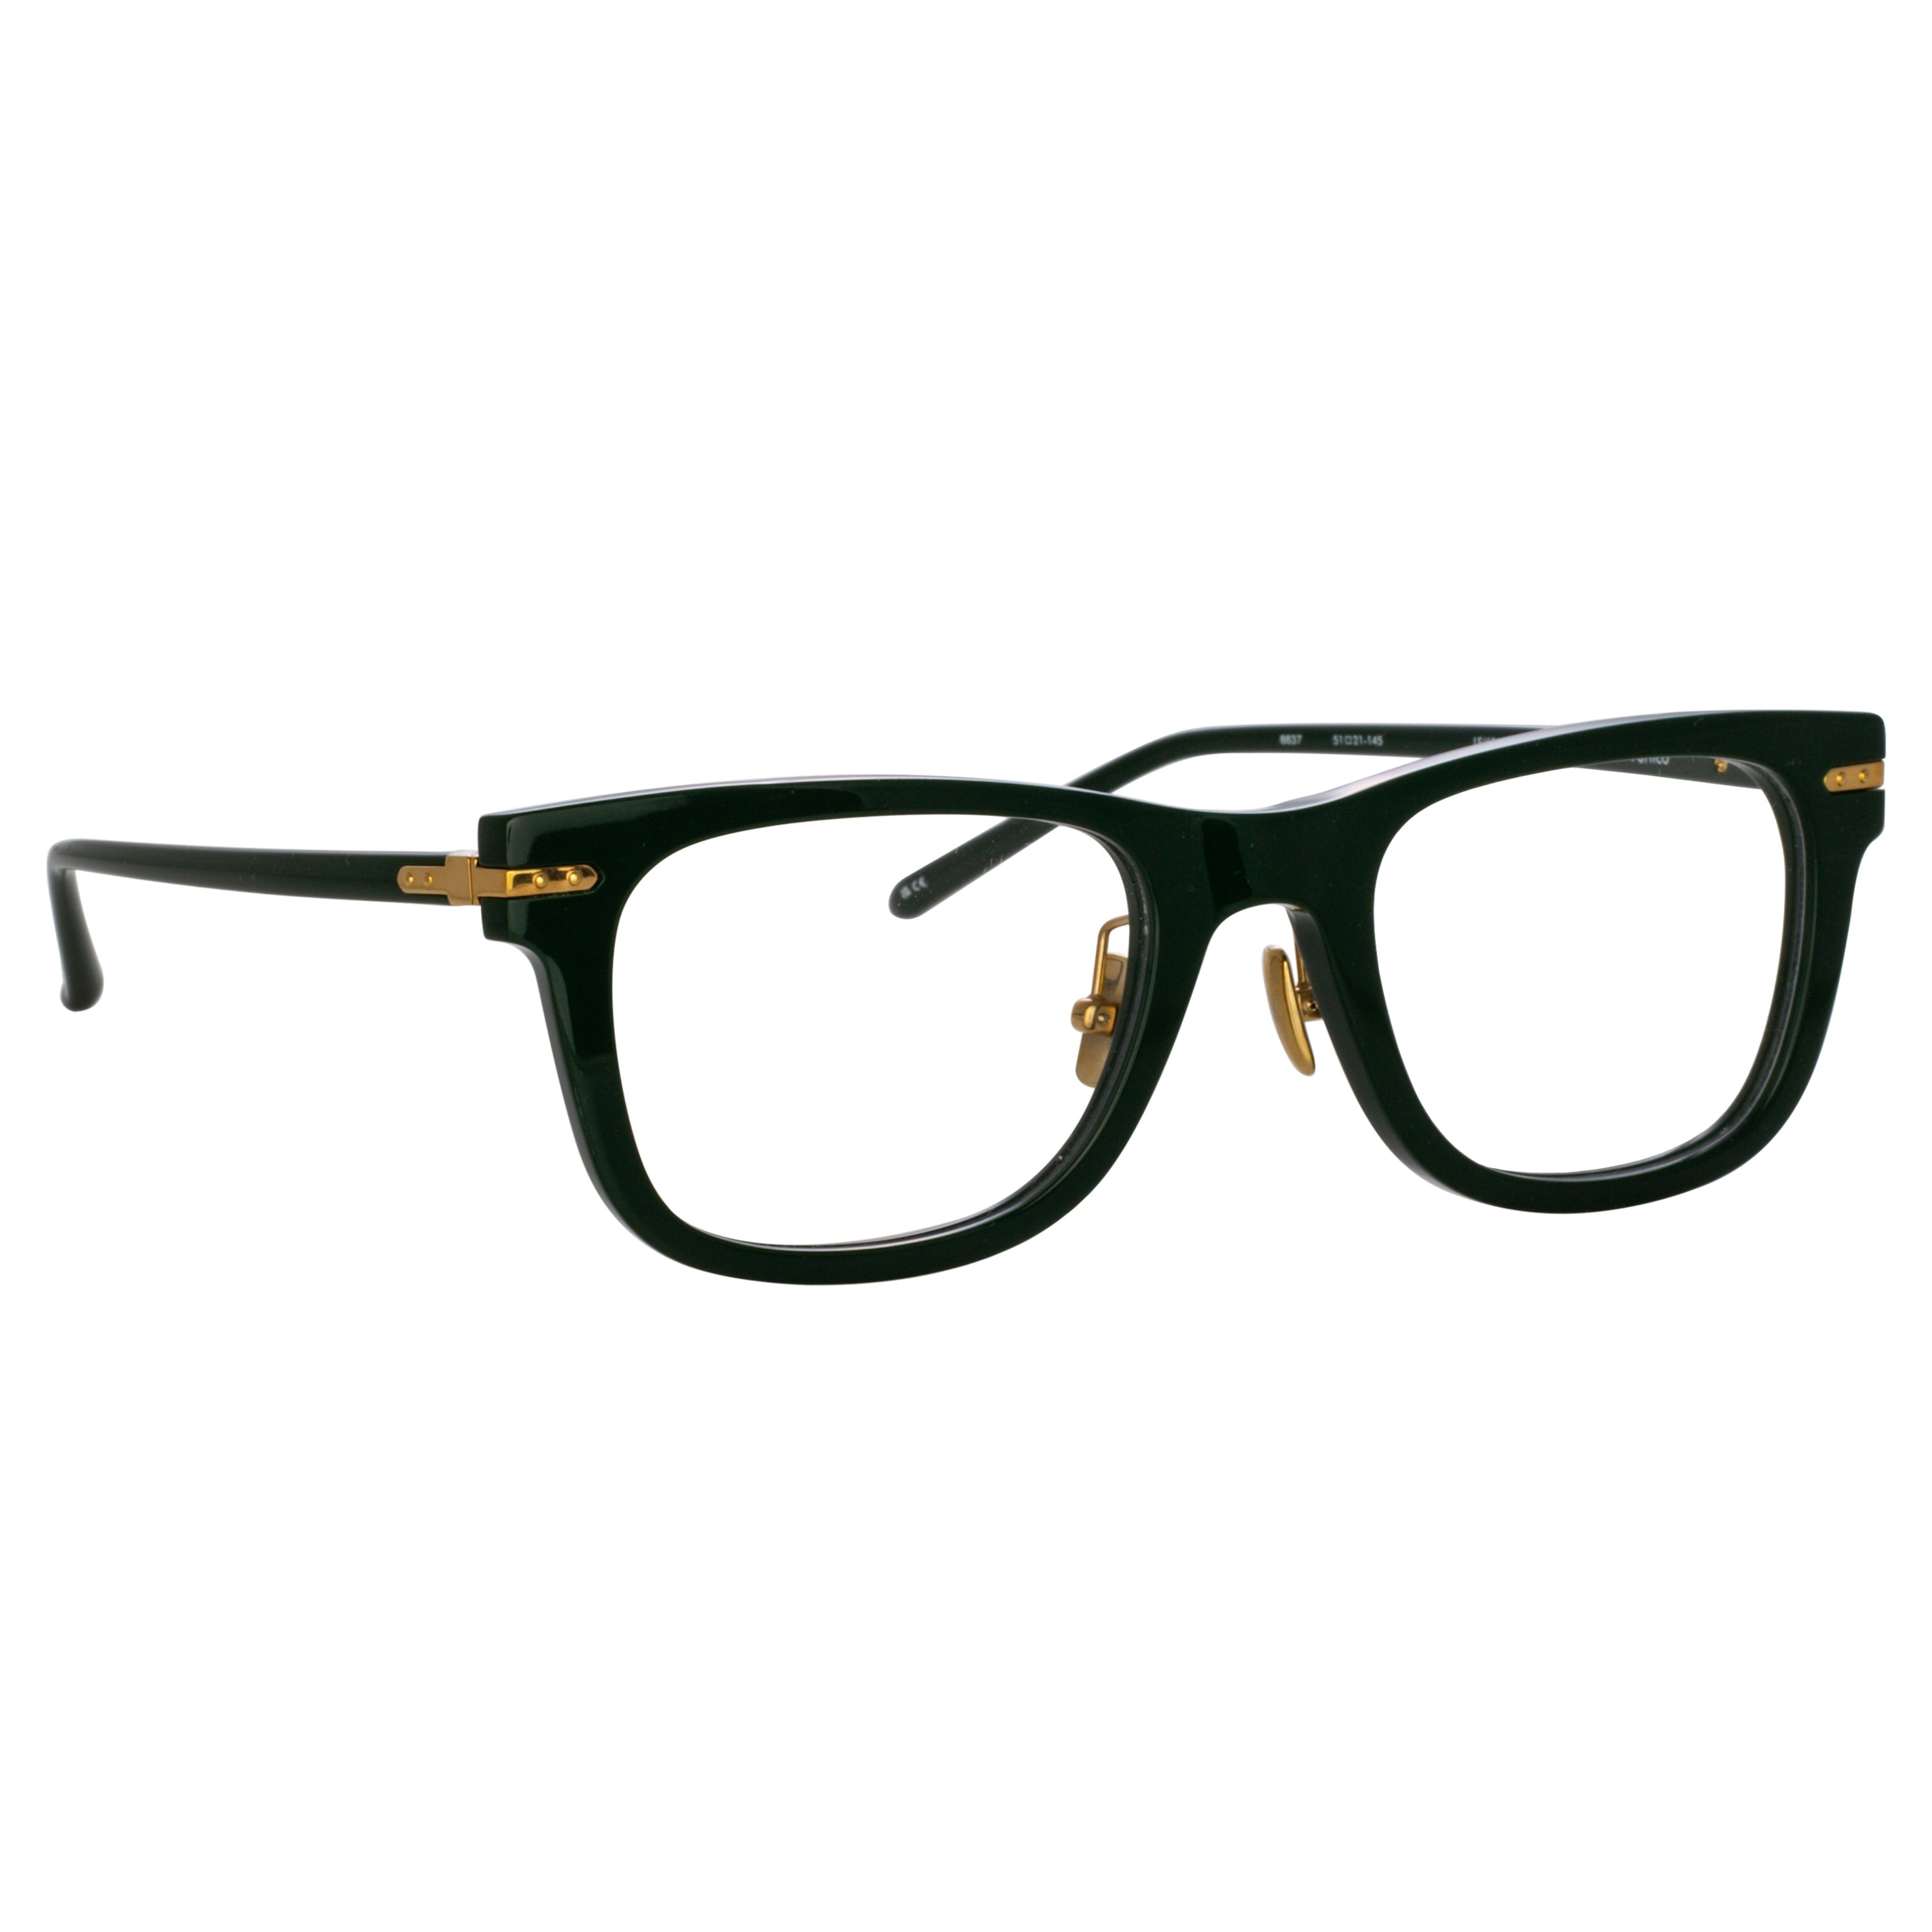 MEN'S PORTICO OPTICAL D-FRAME IN FOREST GREEN (ASIAN FIT) - 3